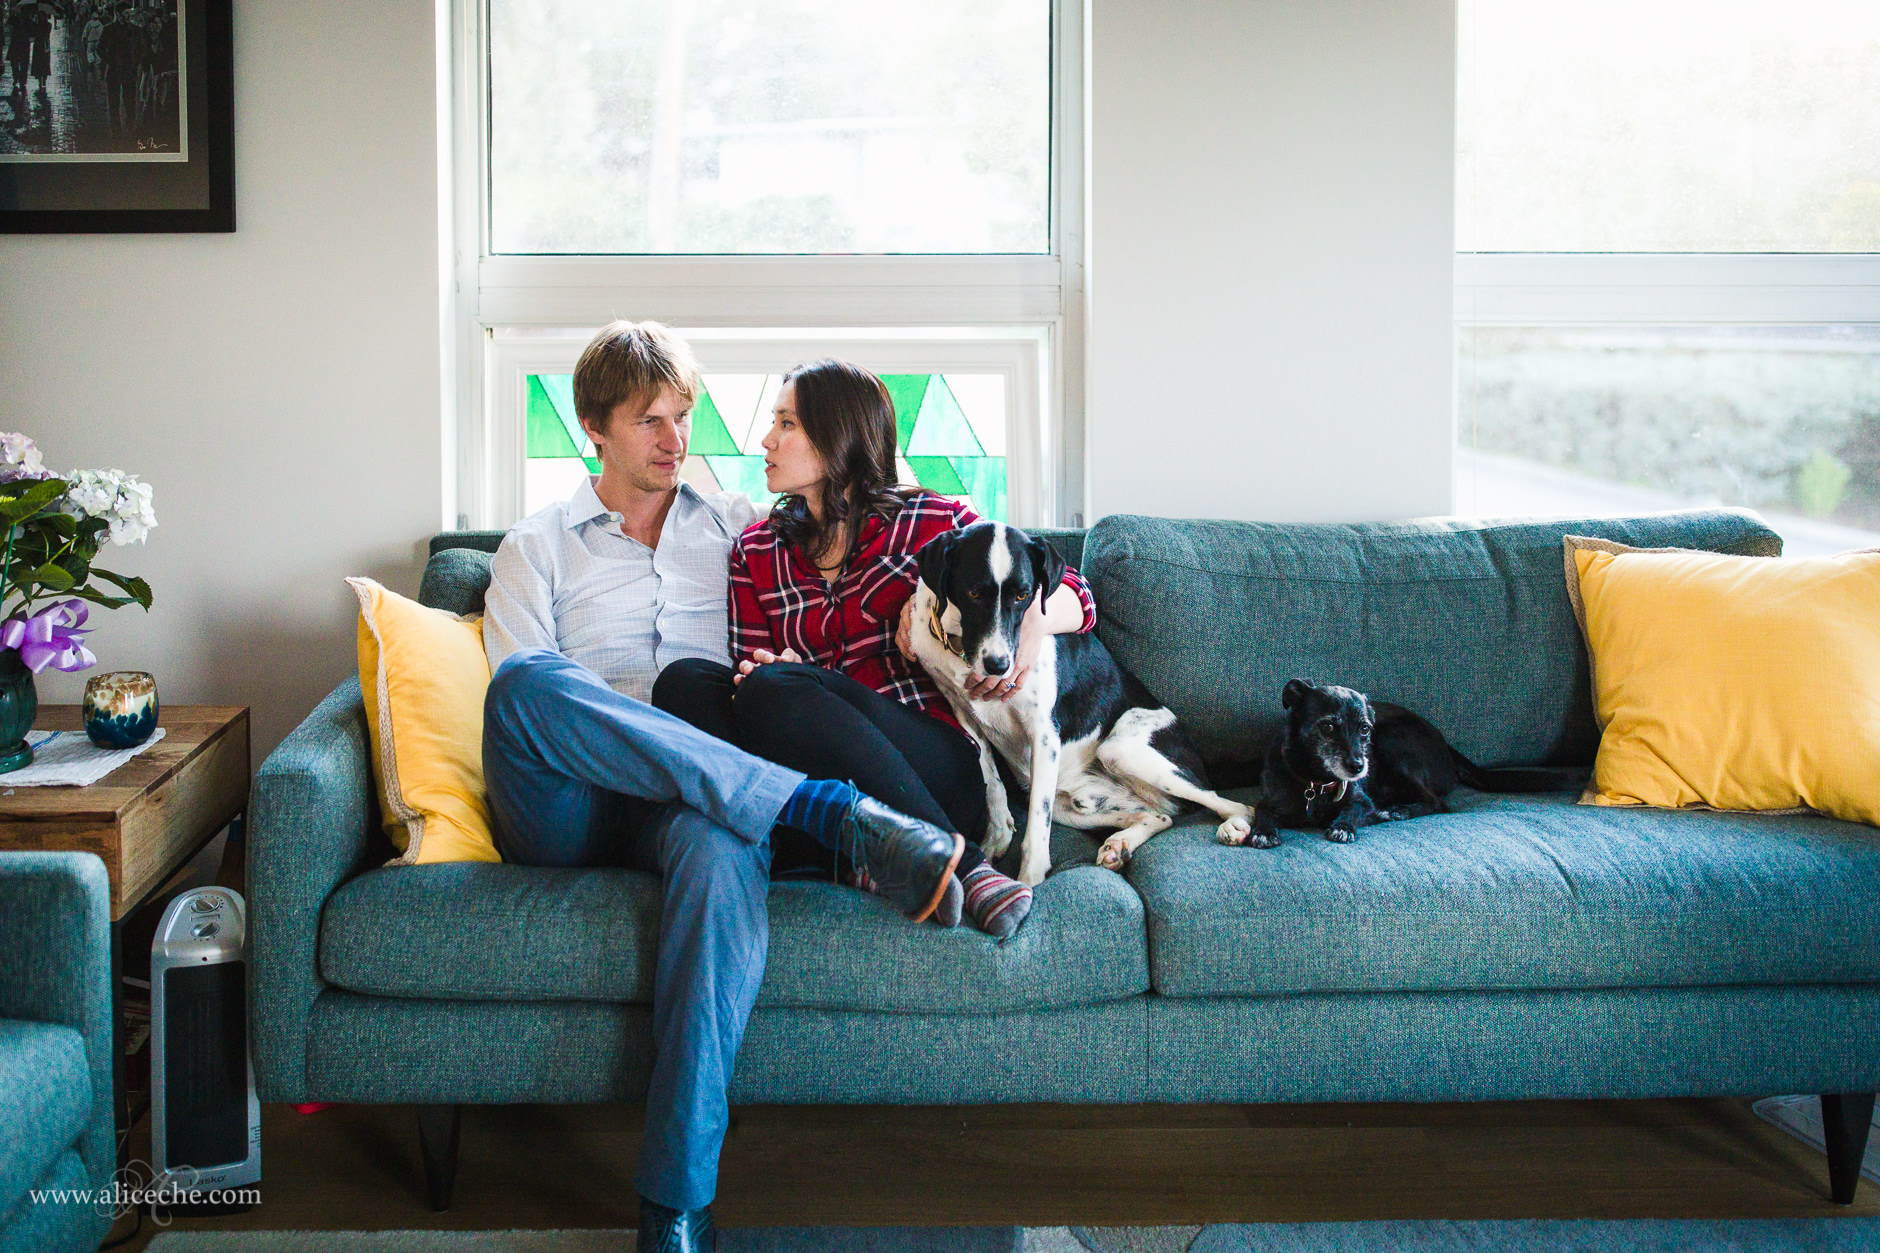 Redwood City In Home Engagement Session with Dogs Couple on Teal Couch with Yellow Pillows